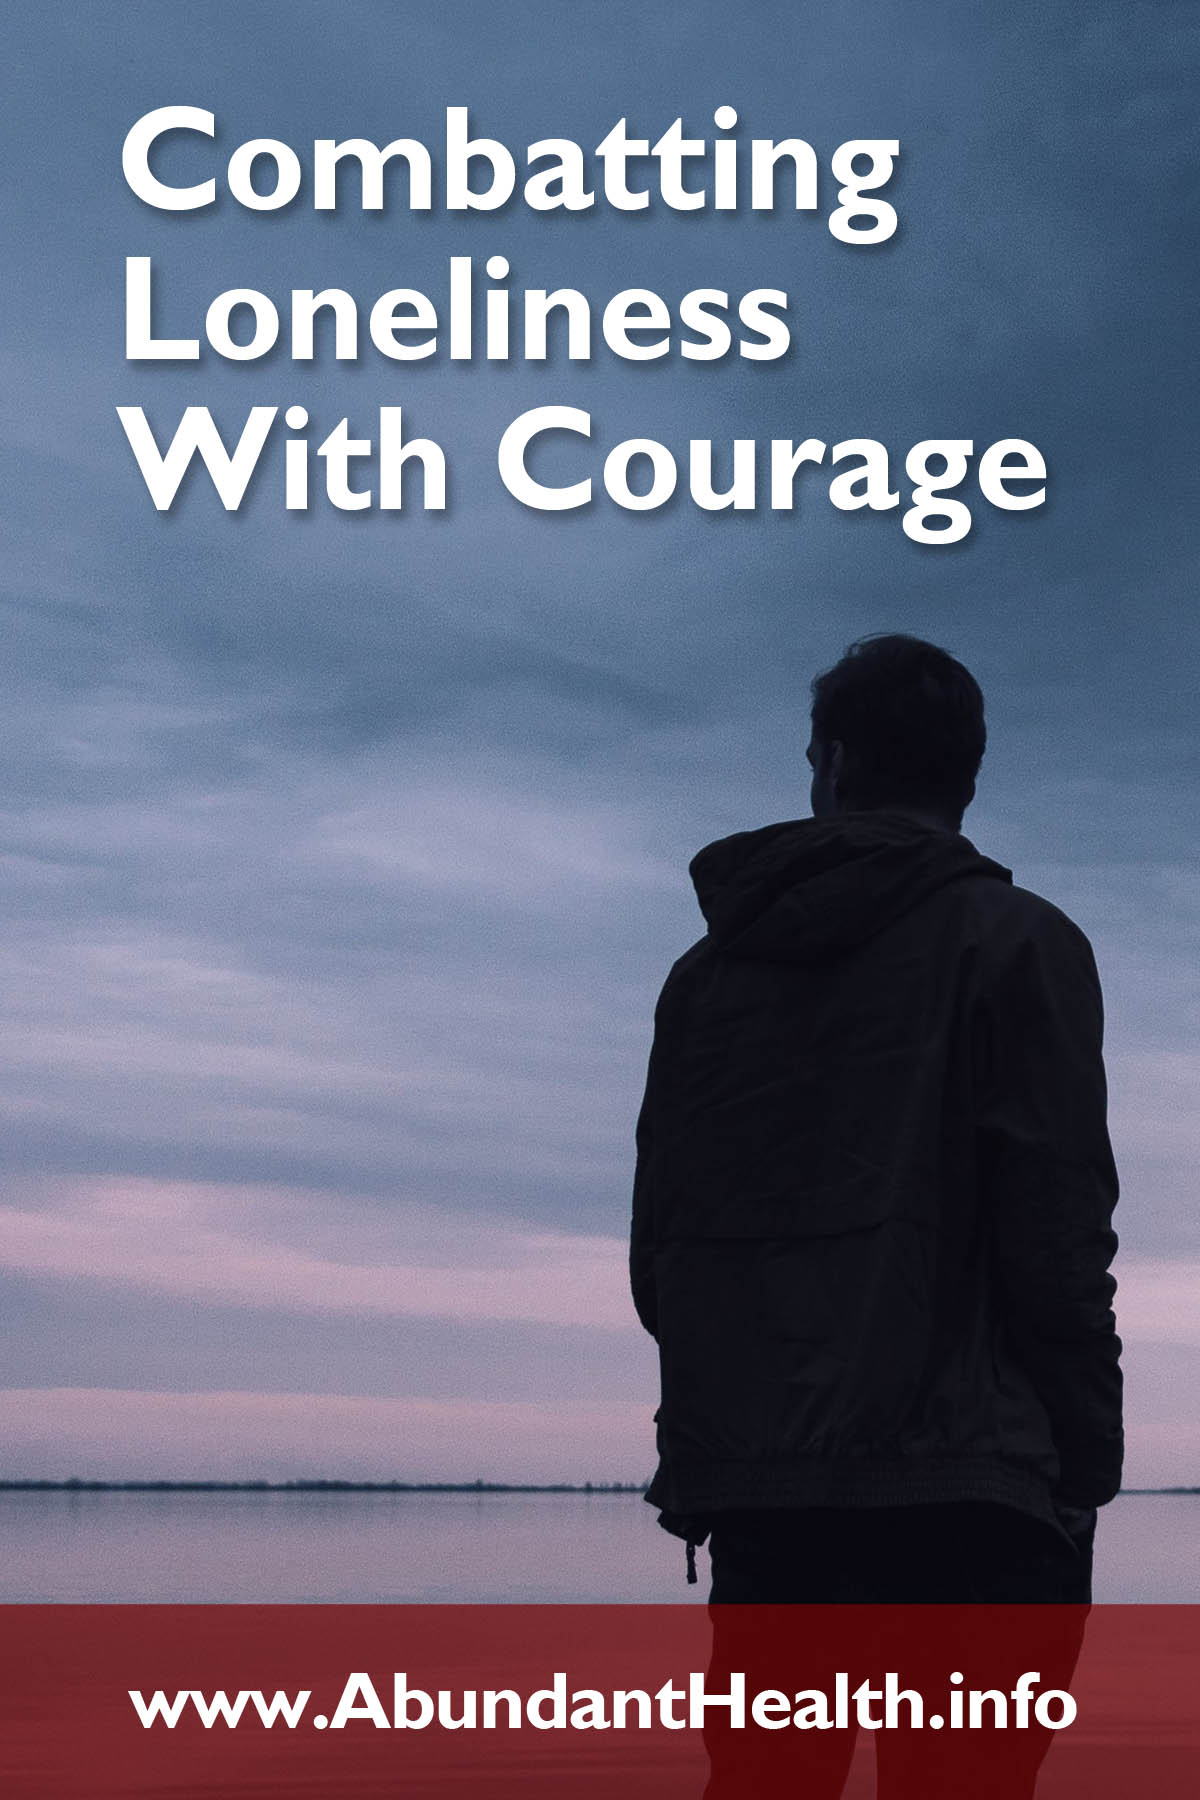 Combatting Loneliness With Courage